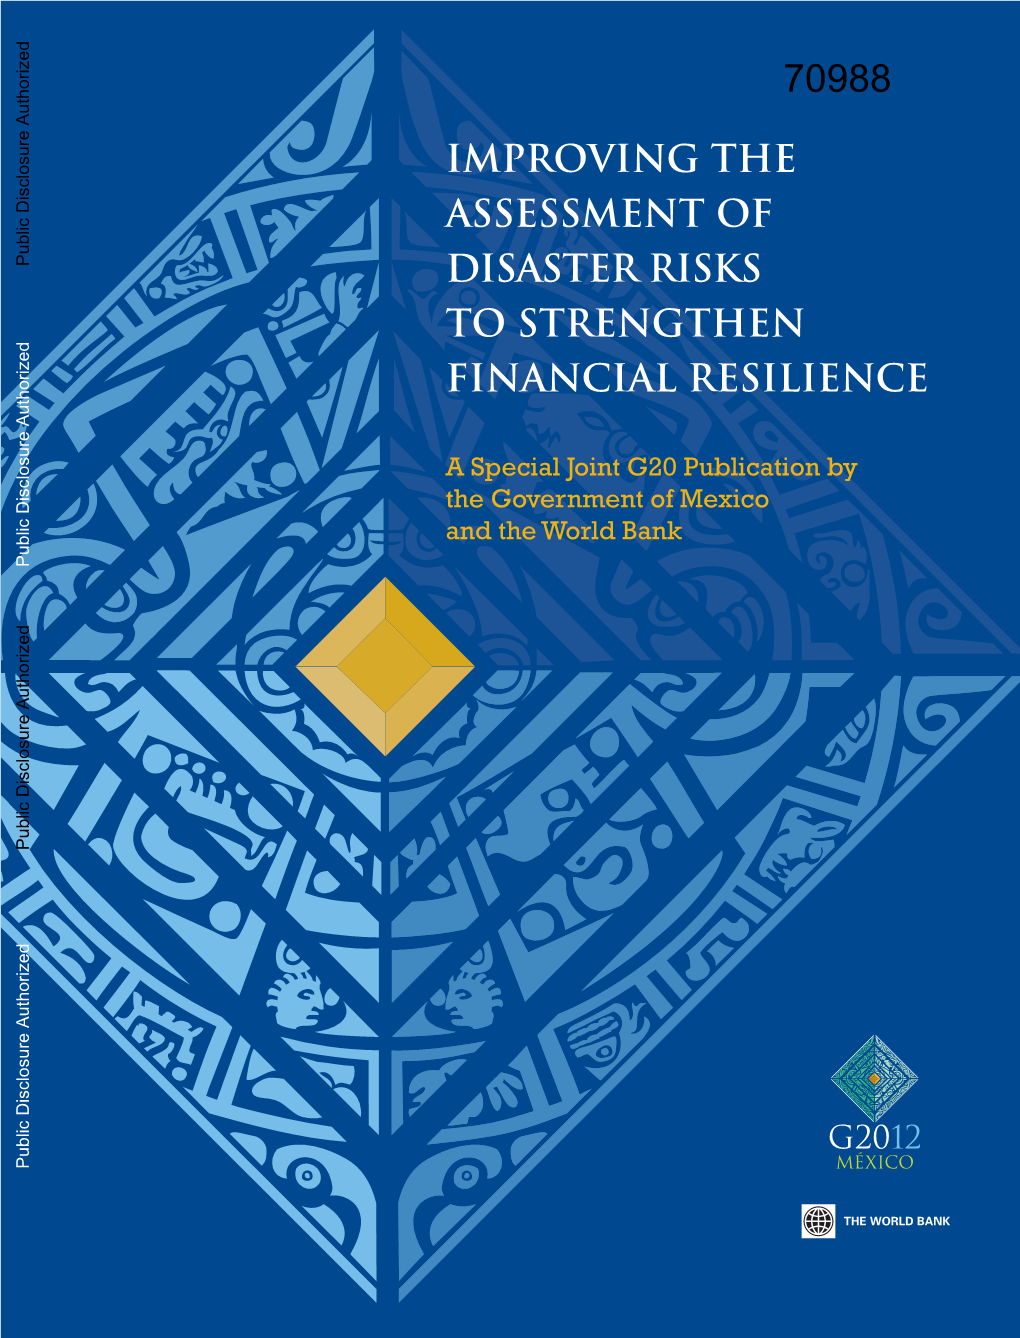 Improving the Assessment of Disaster Risks to Strengthen Financial Resilience